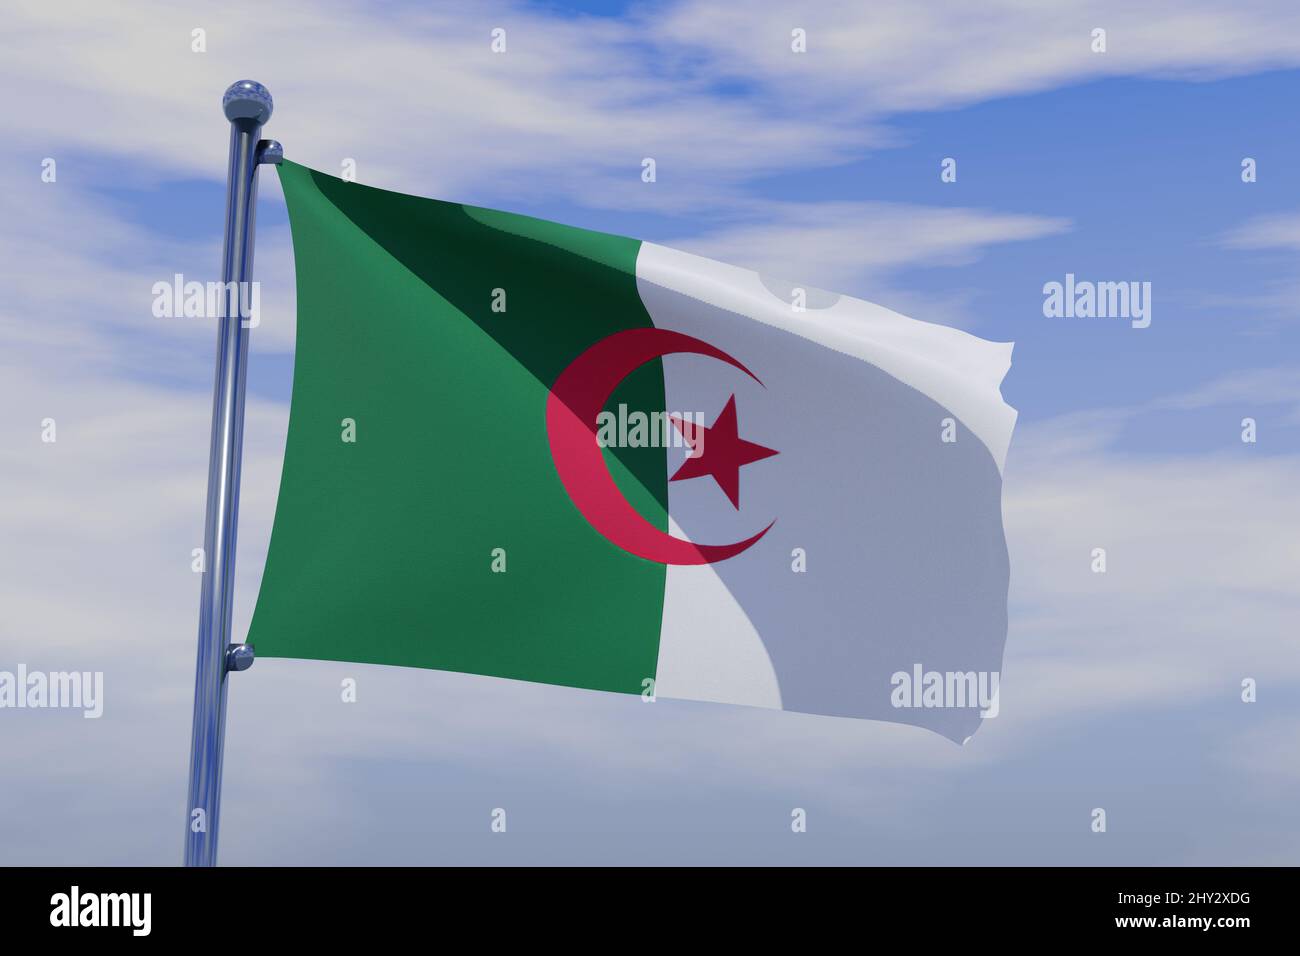 3D illustration of Waving flag of Algeria with chrome flag pole in blue sky waving in the wind. High resolution flag with clarity. Stock Photo